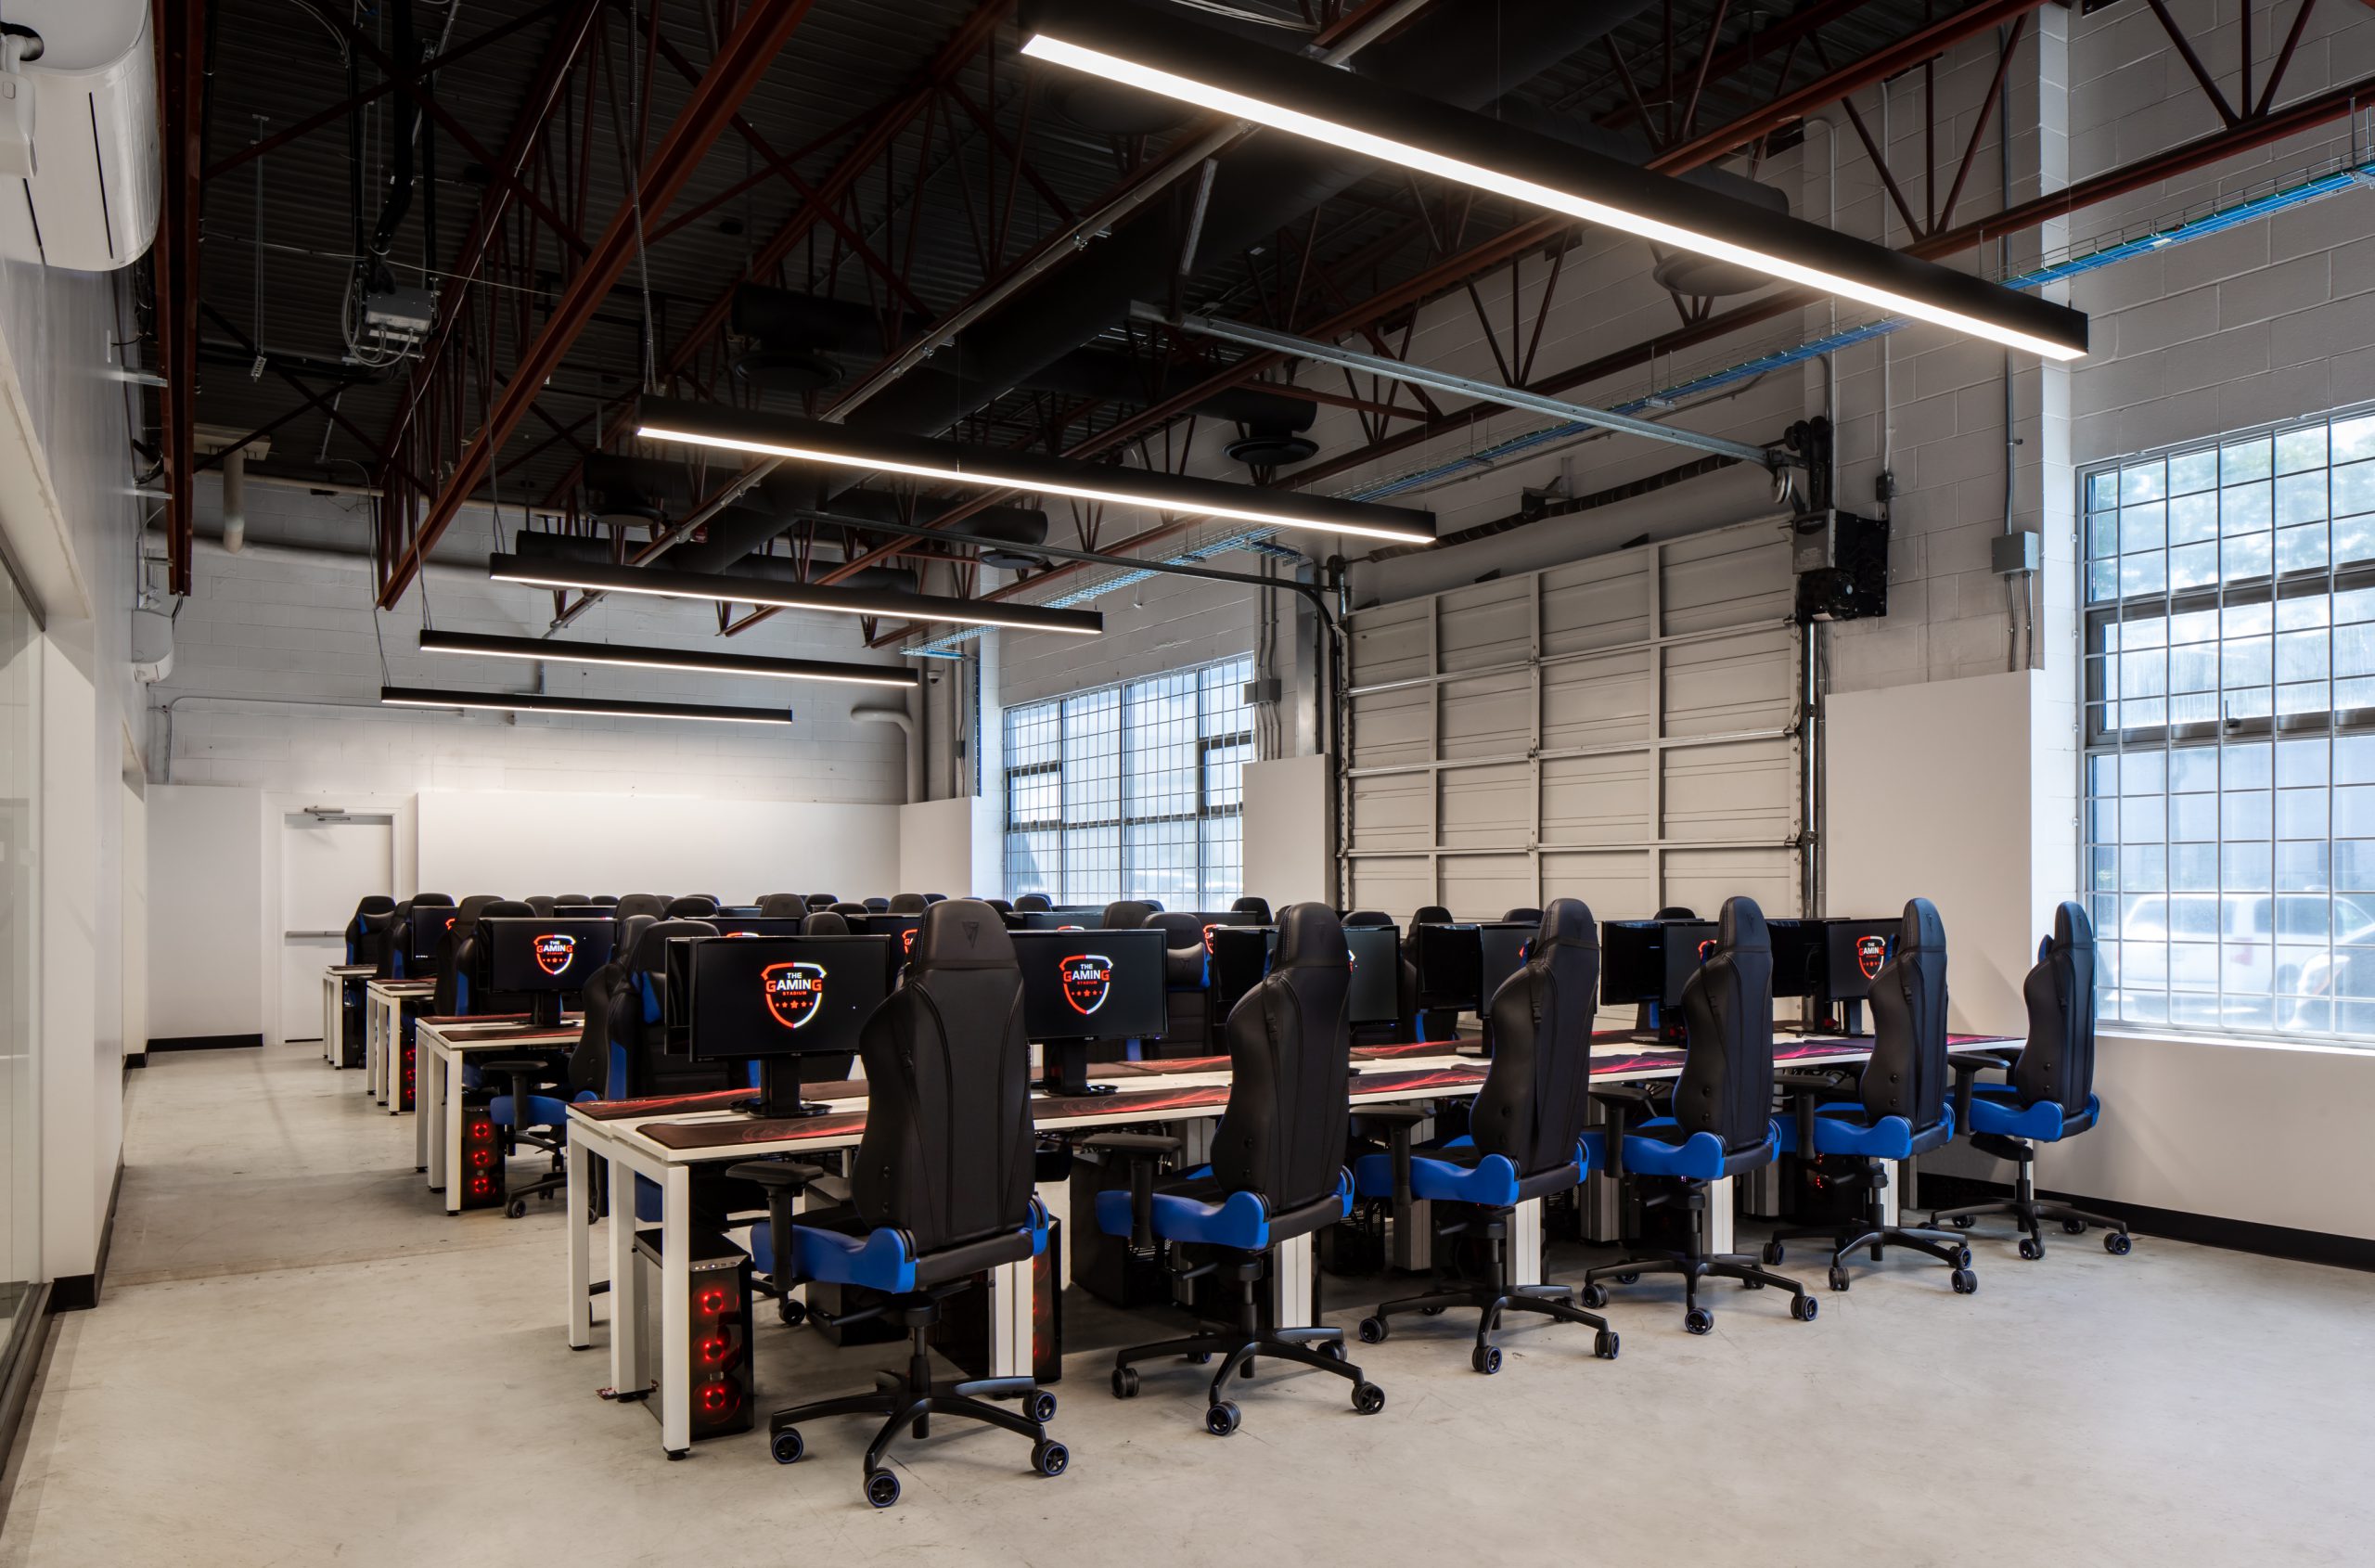 The Gaming Stadium in Richmond BC Professional Gaming Stadium Interior Design Gaming tables and chairs by Cutler